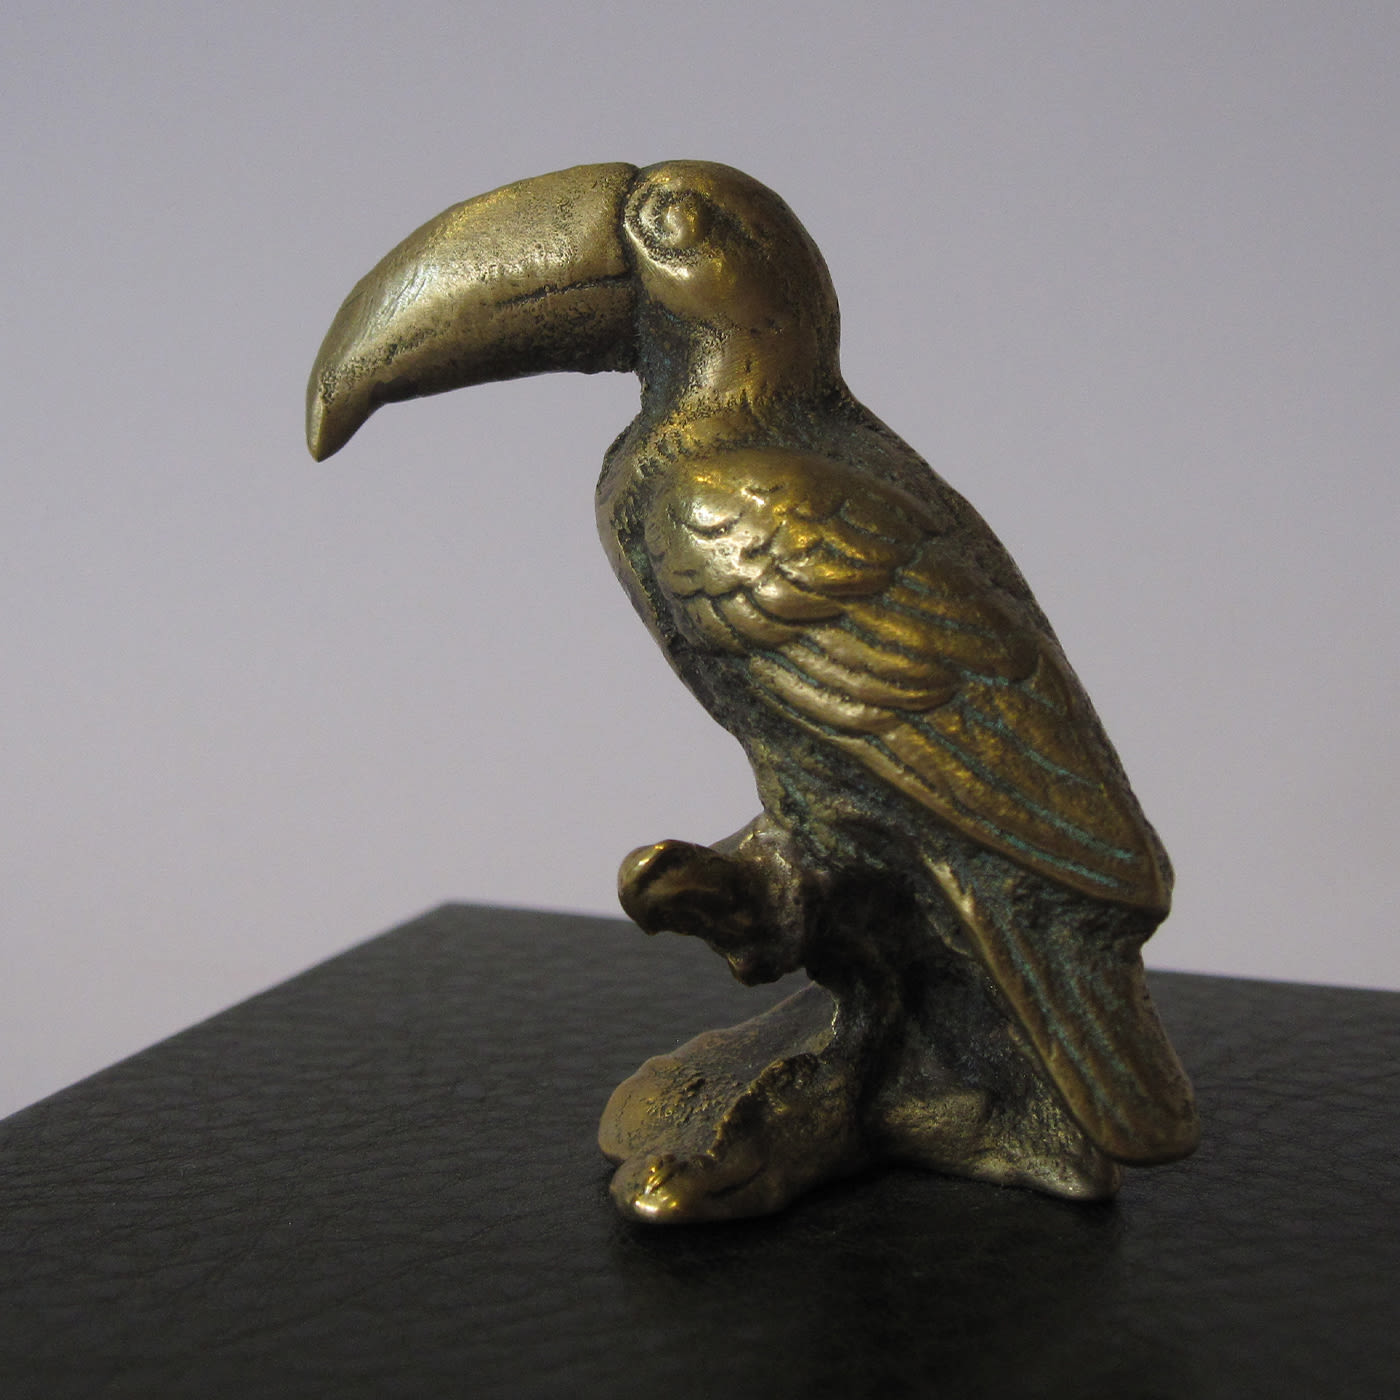 Green Leather Box with Brass Toucan - AtelierGK Firenze